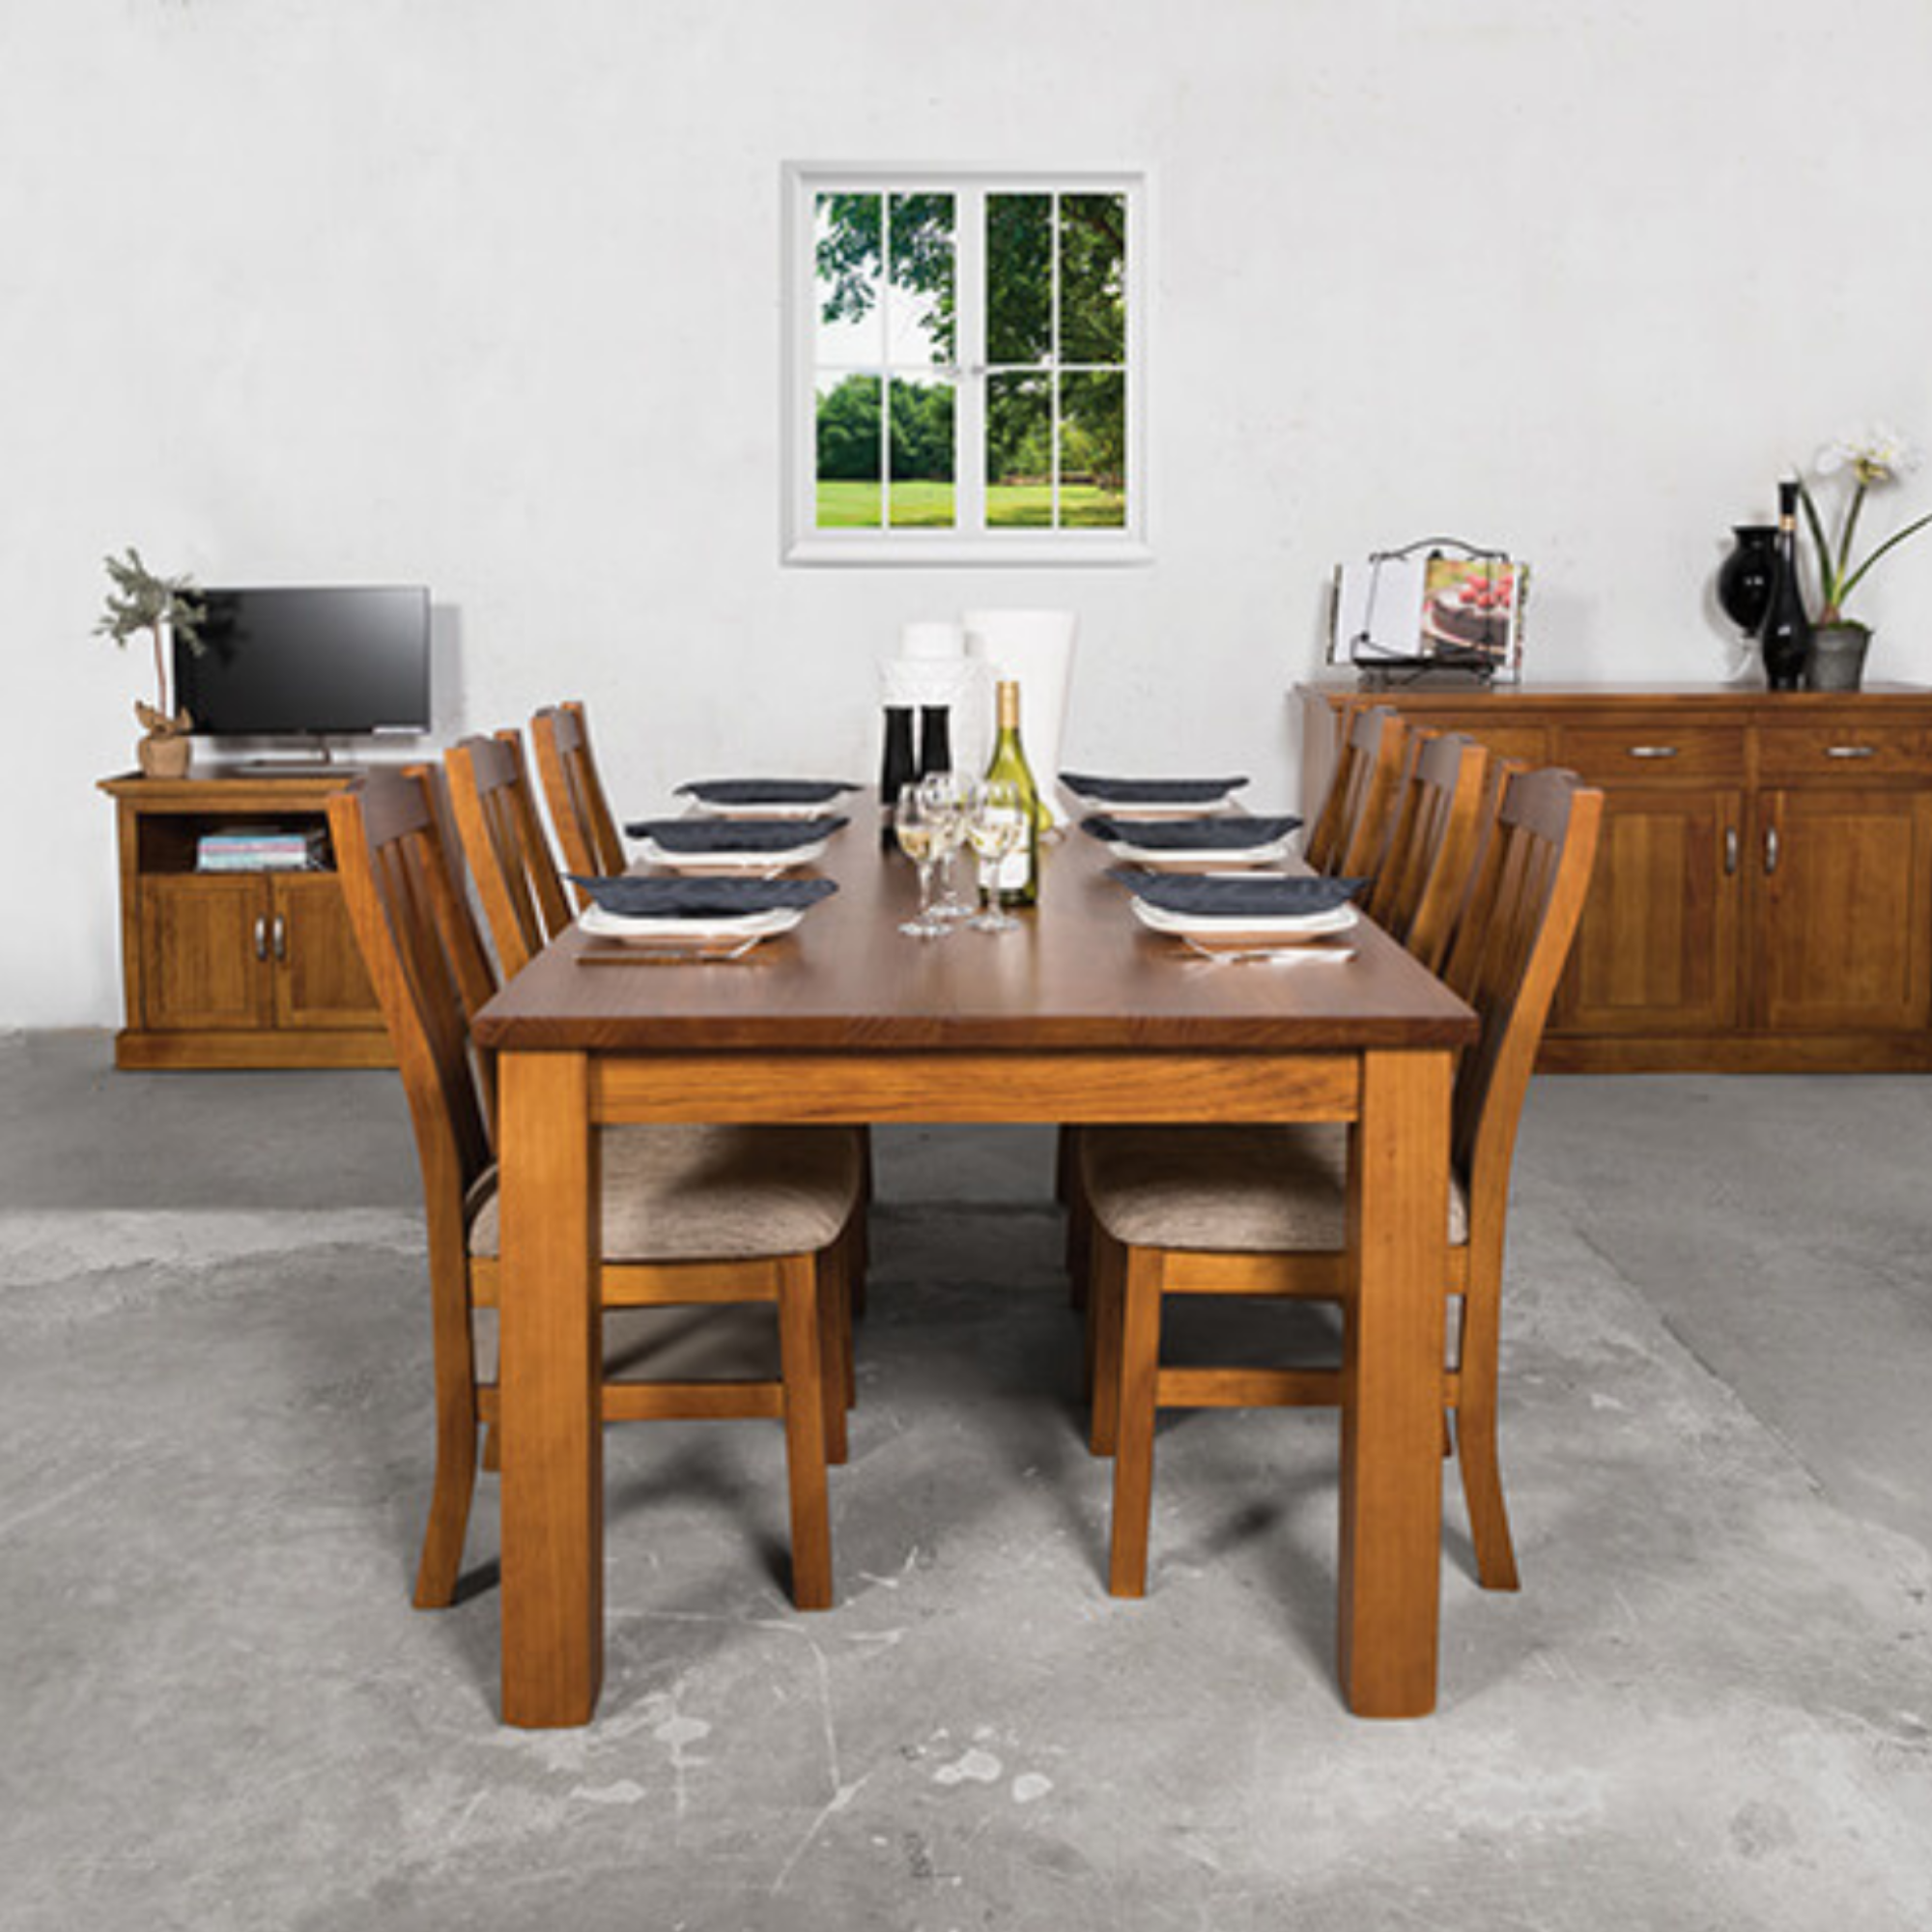 CHARLTON 1800 DINING TABLE | NZ MADE